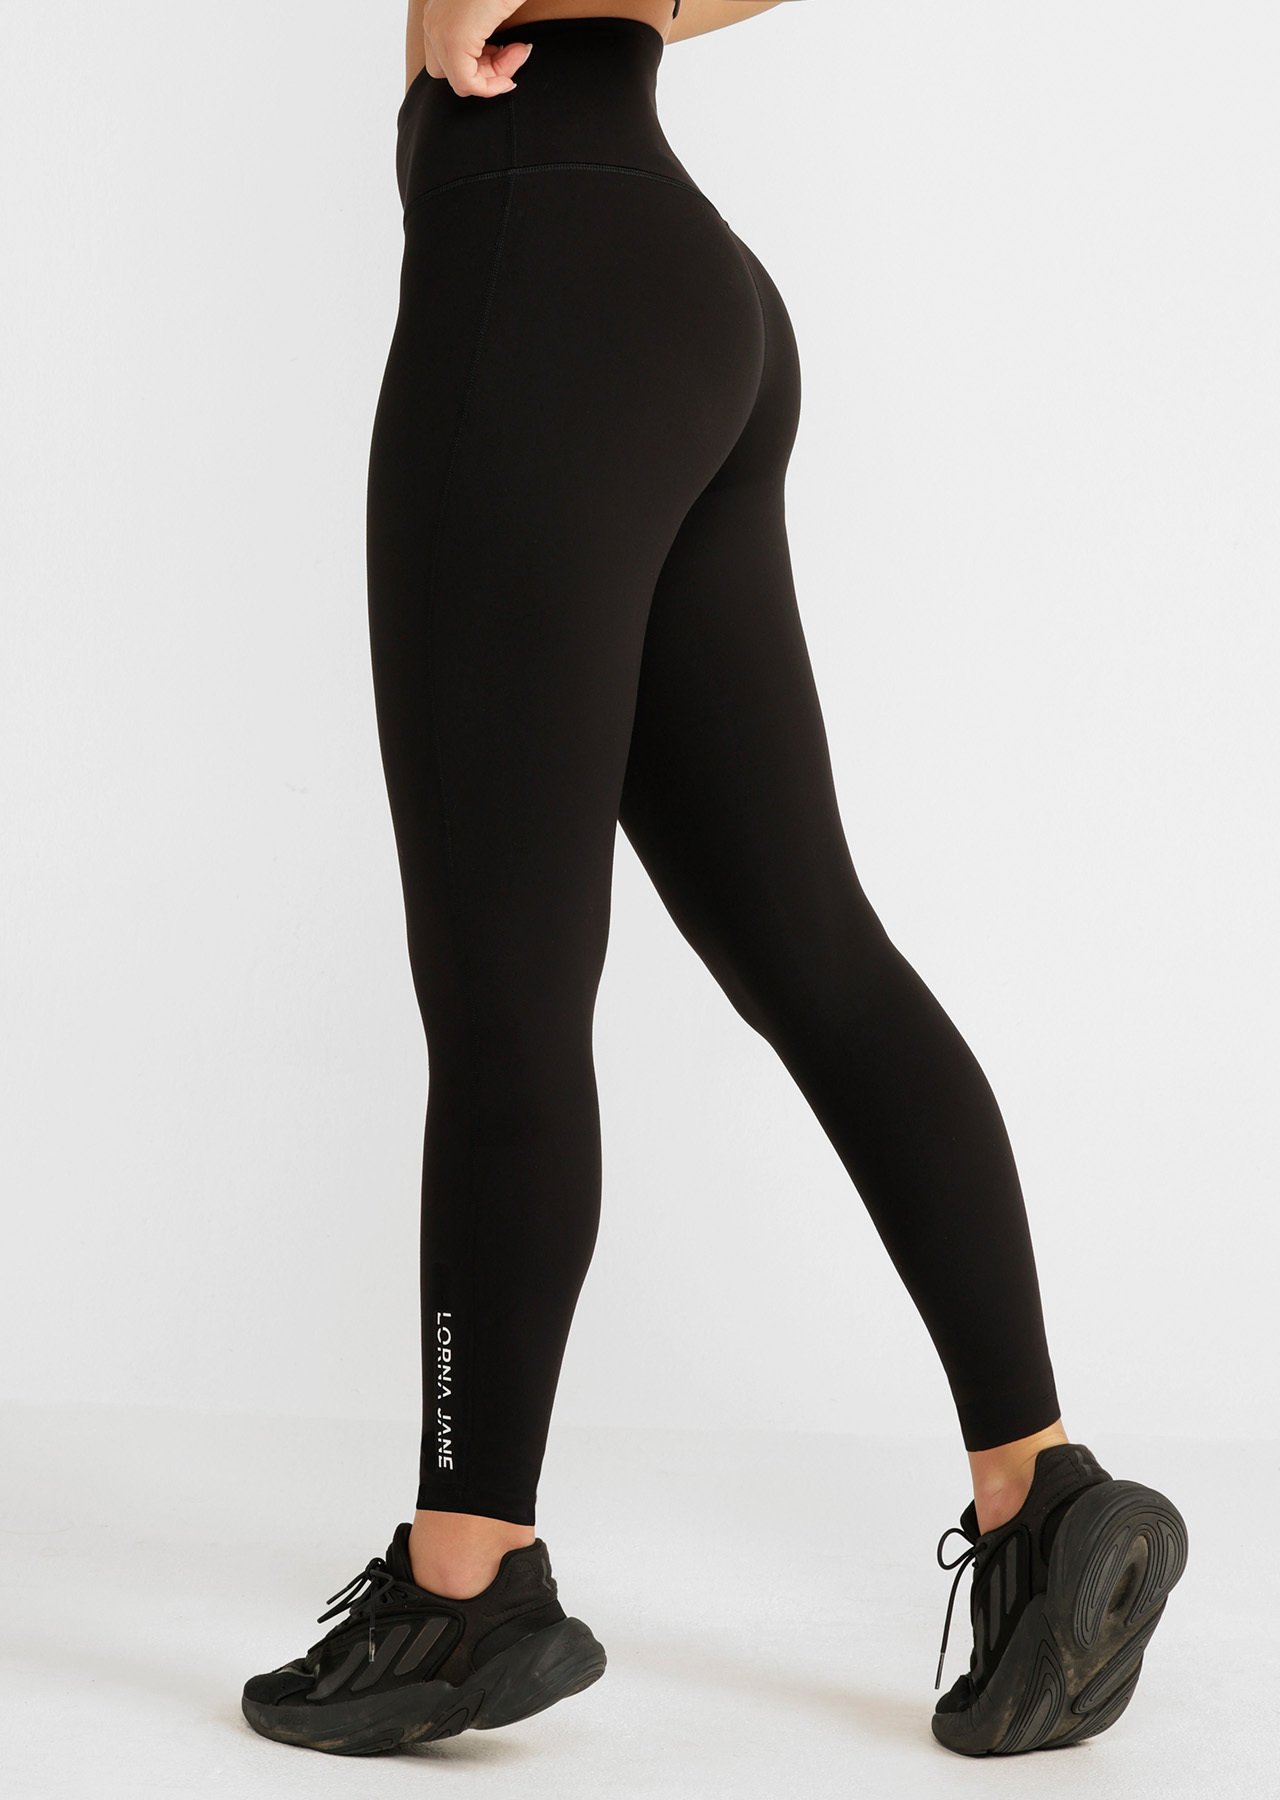 2-Pack Stretchy Ankle-Length Leggings Set- Buy Now